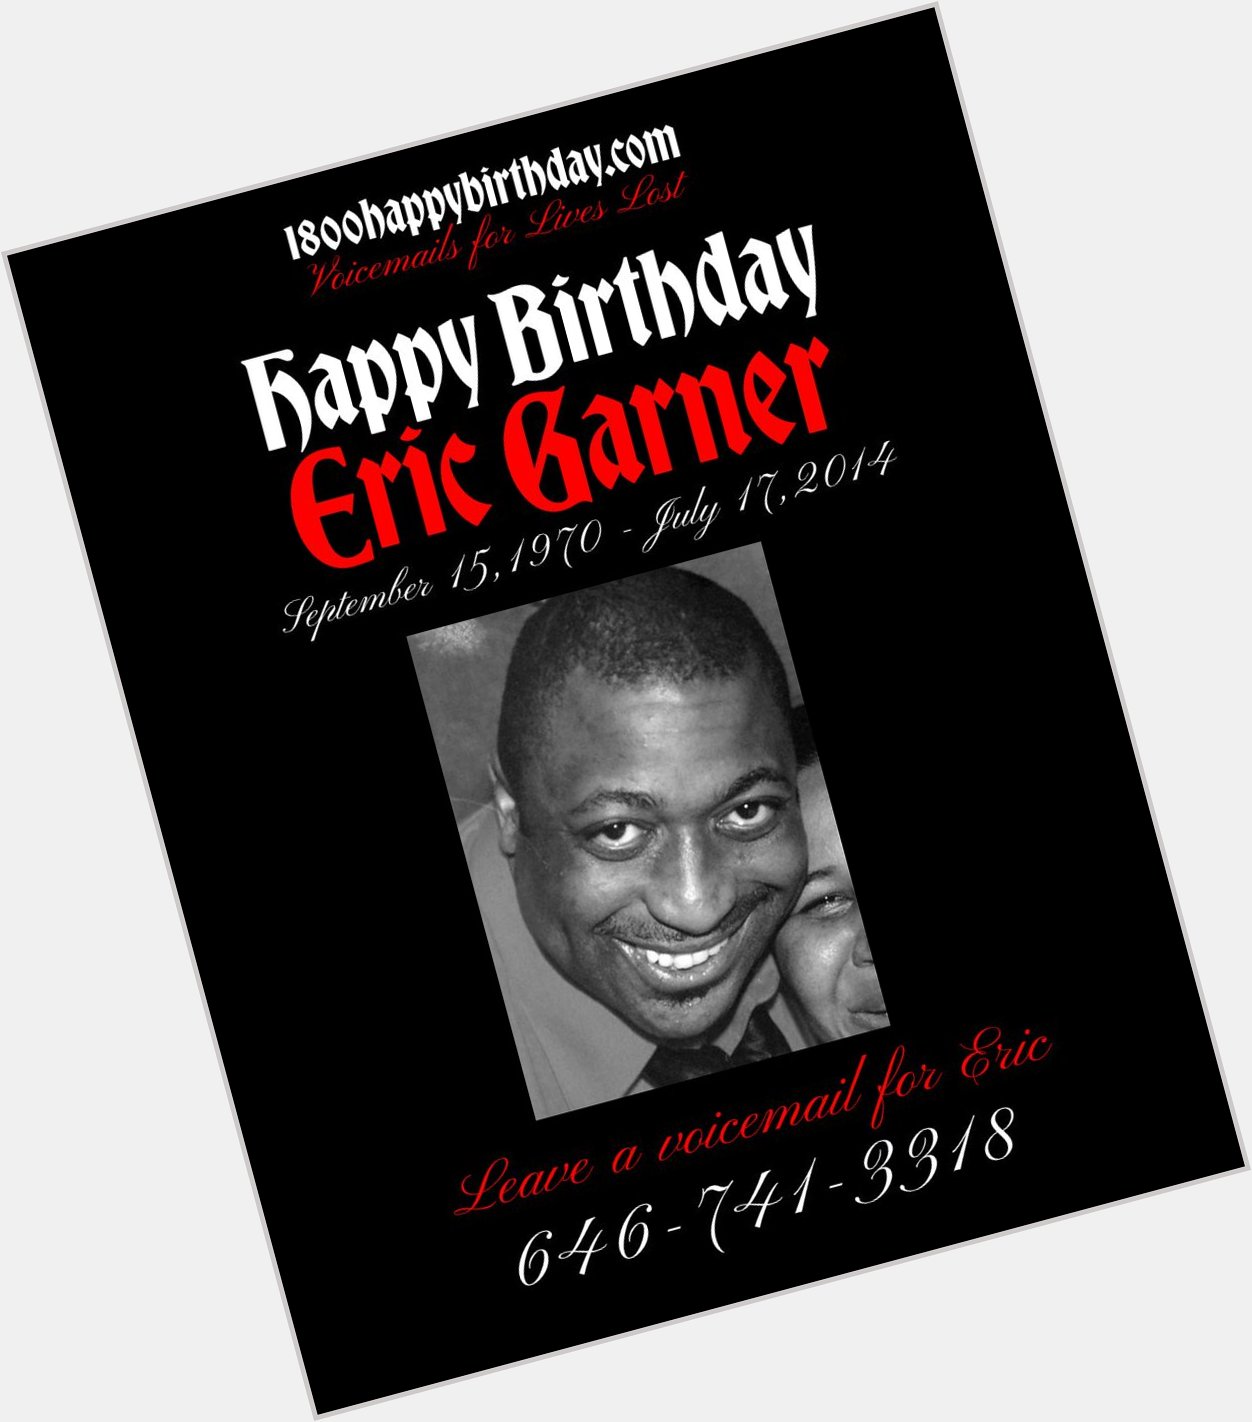 Happy Birthday Eric Garner     You can leave a voicemail by calling 646-741-3318 